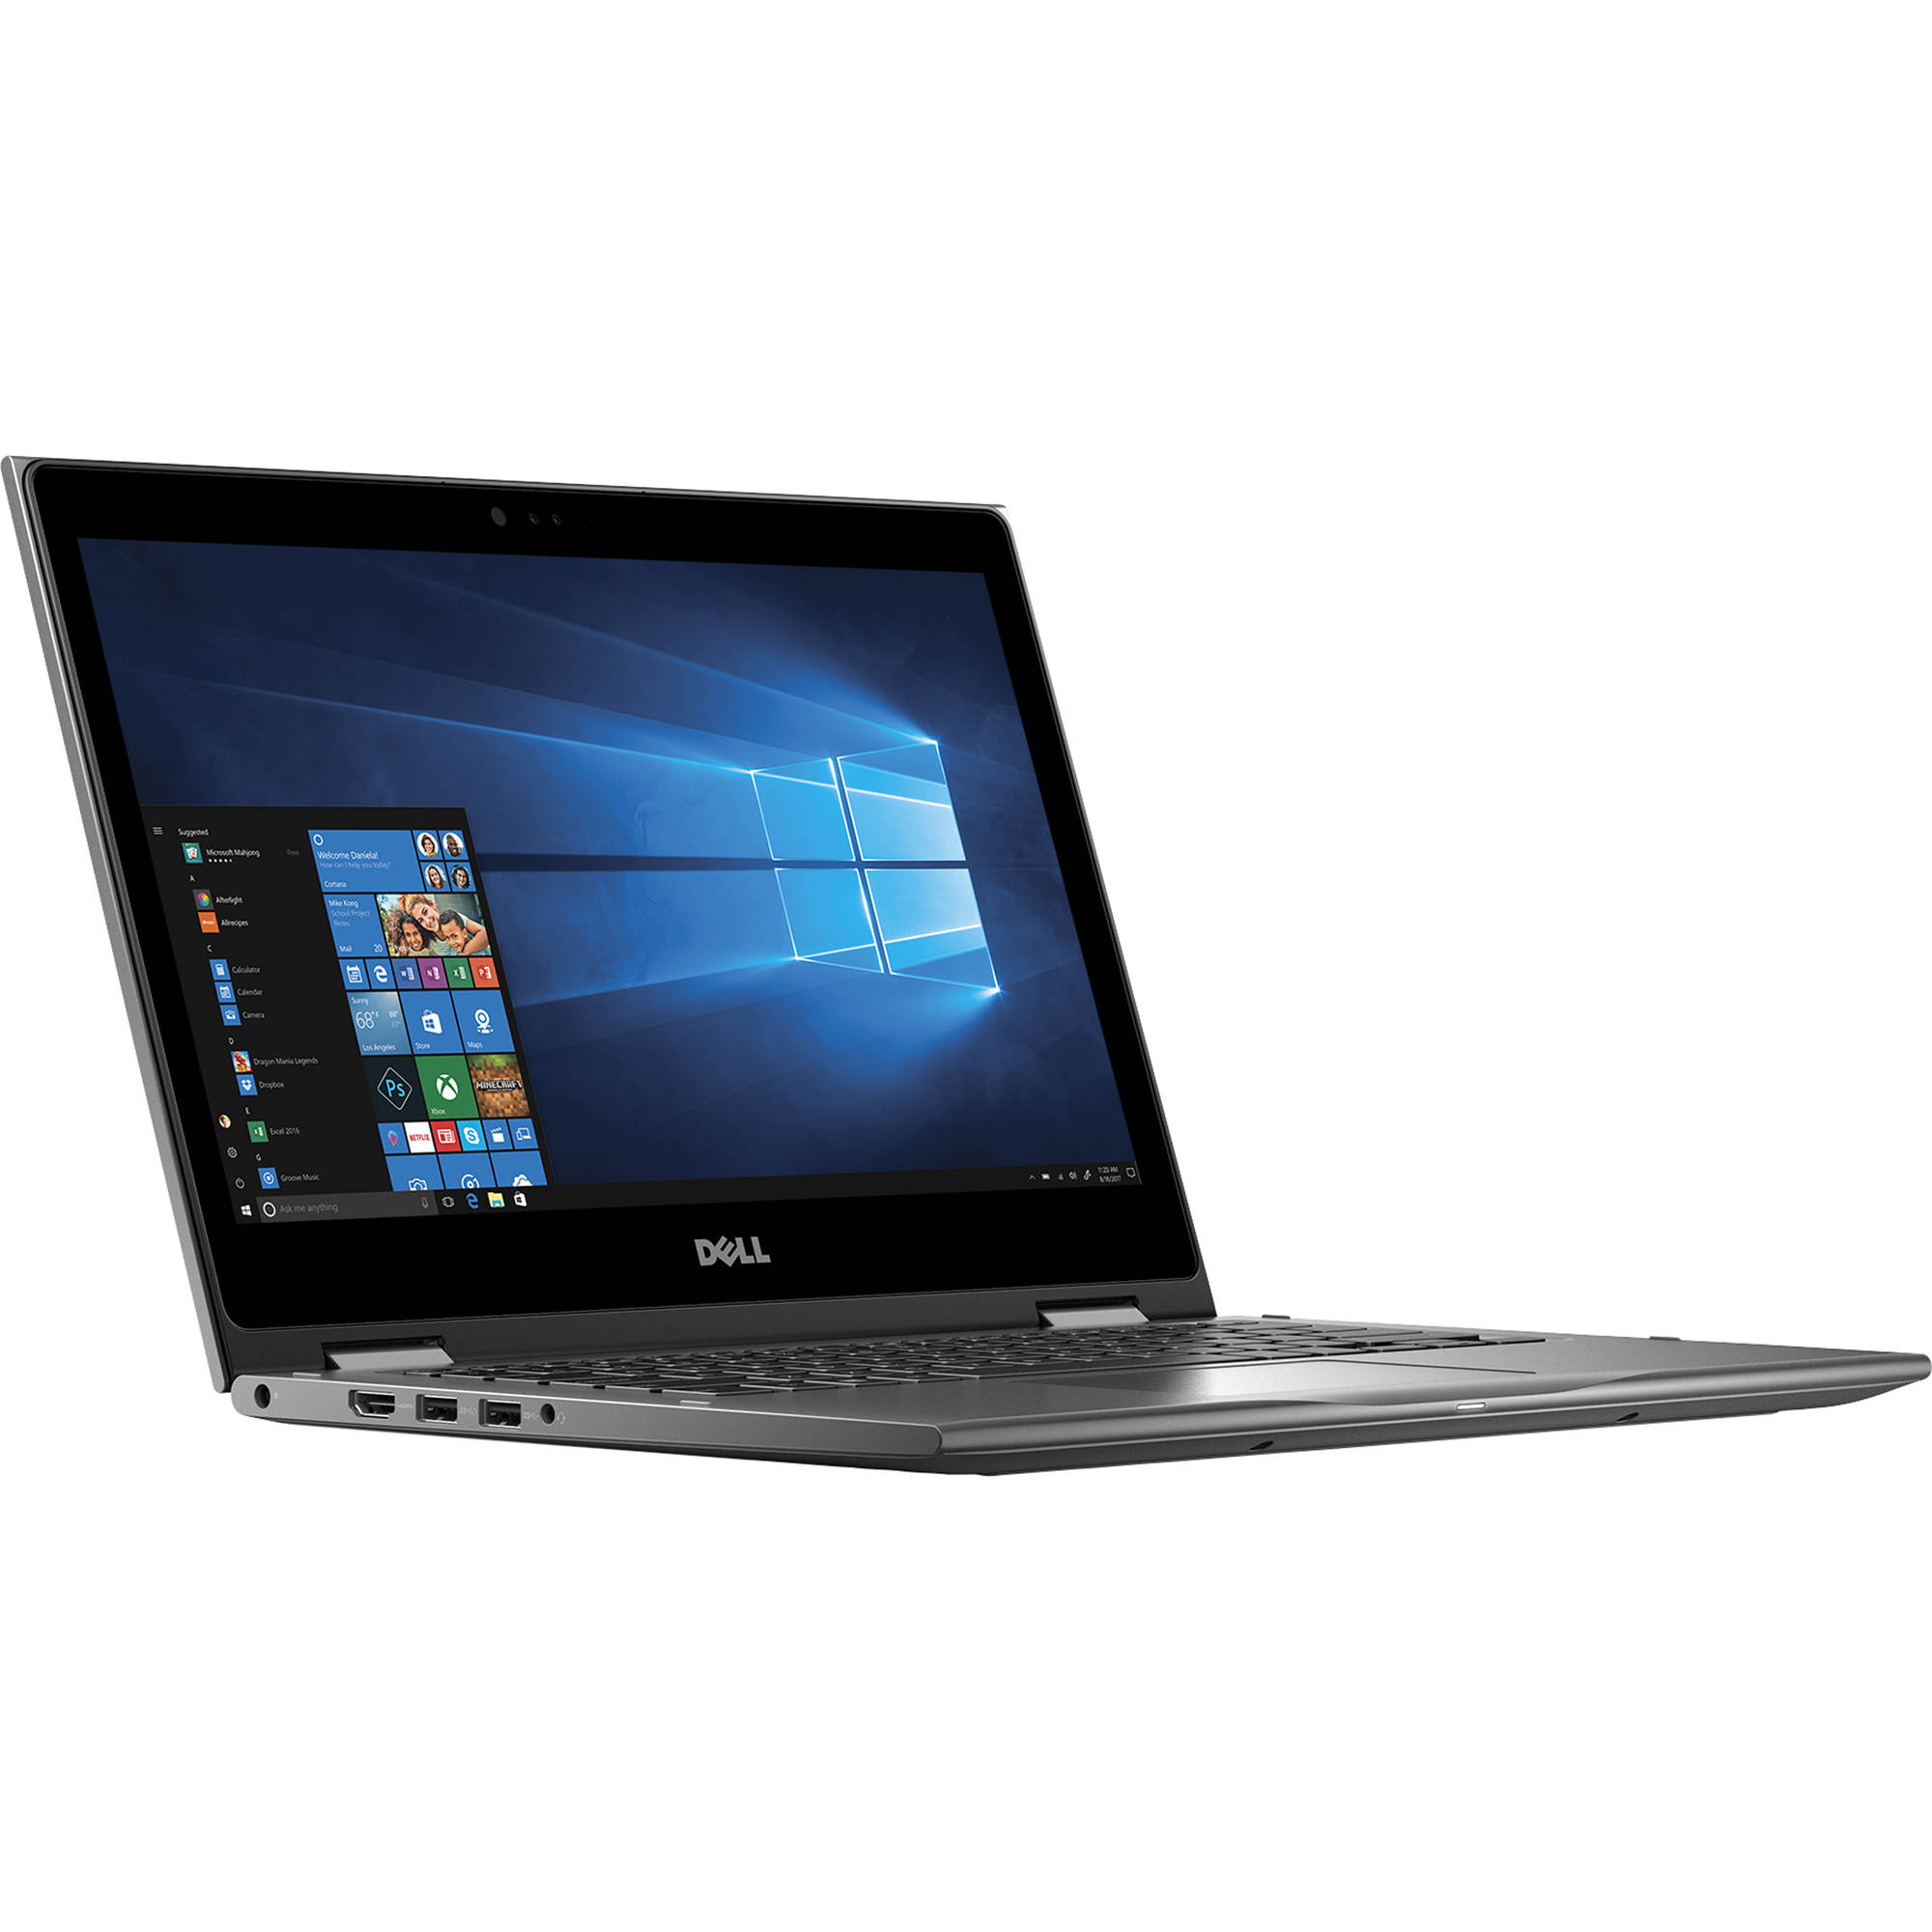 Dell Inspiron 13 5000 Slow Performance issue Fixed - infofuge